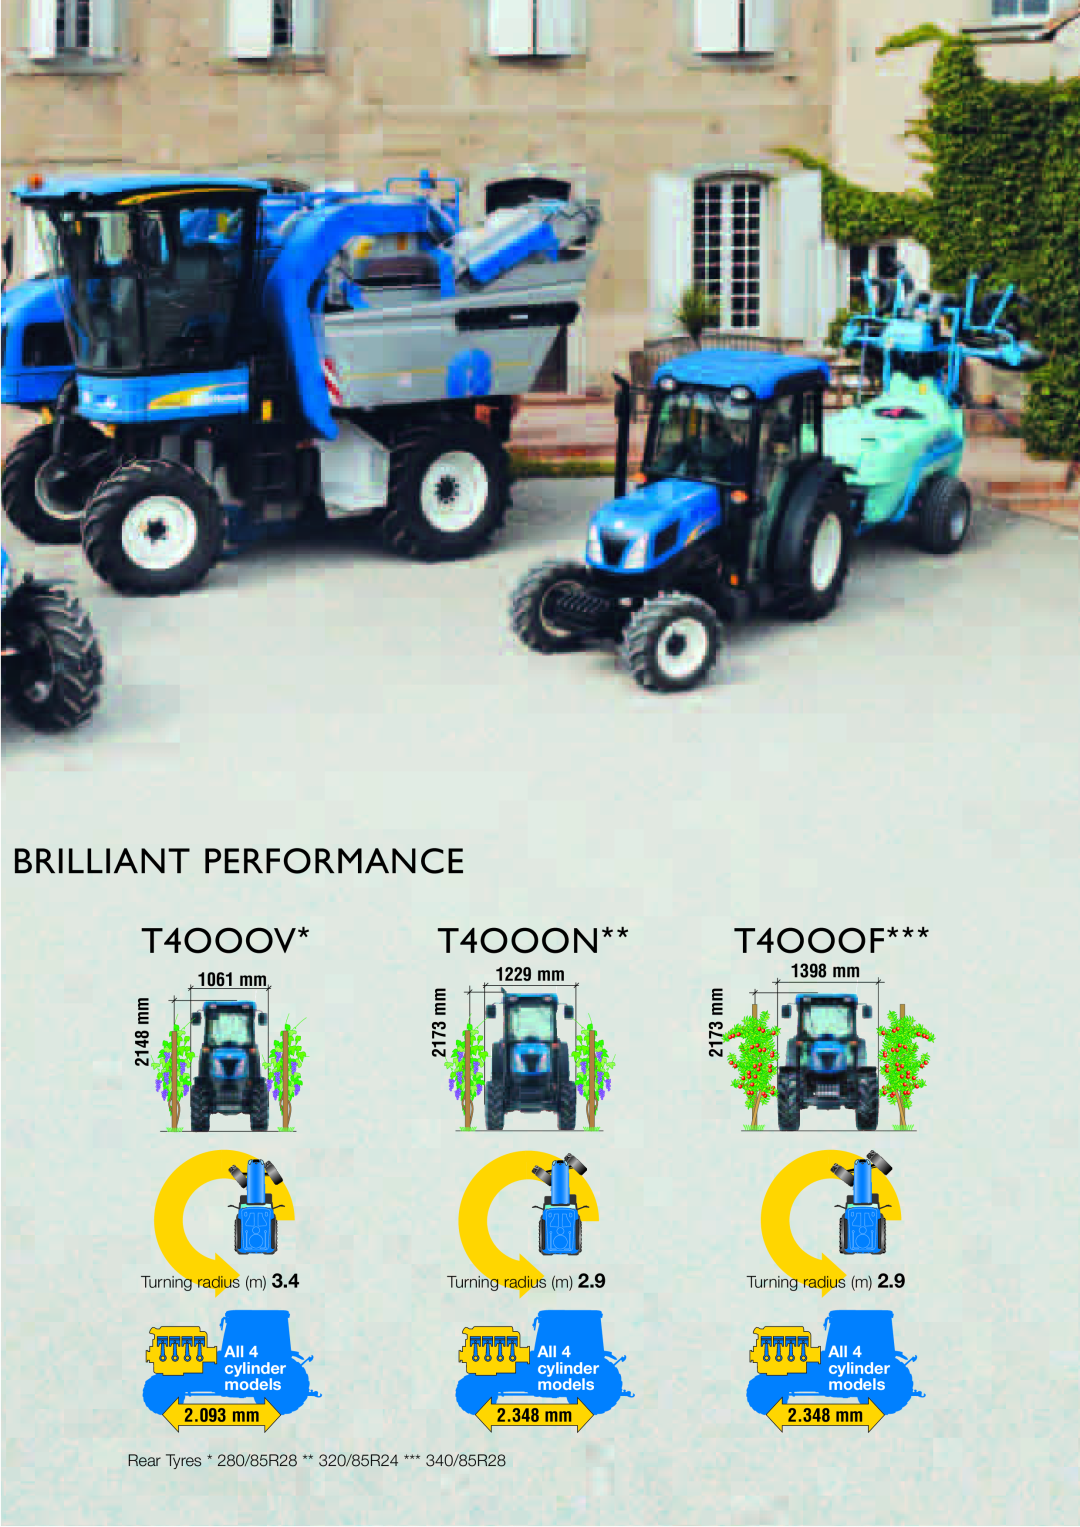 New Holland T4O4O Brilliant Performance, T4OOOV, T4OOON, T4OOOF, 2173 mm, 1229 mm, 1398 mm, 2.348 mm, Turning radius m 